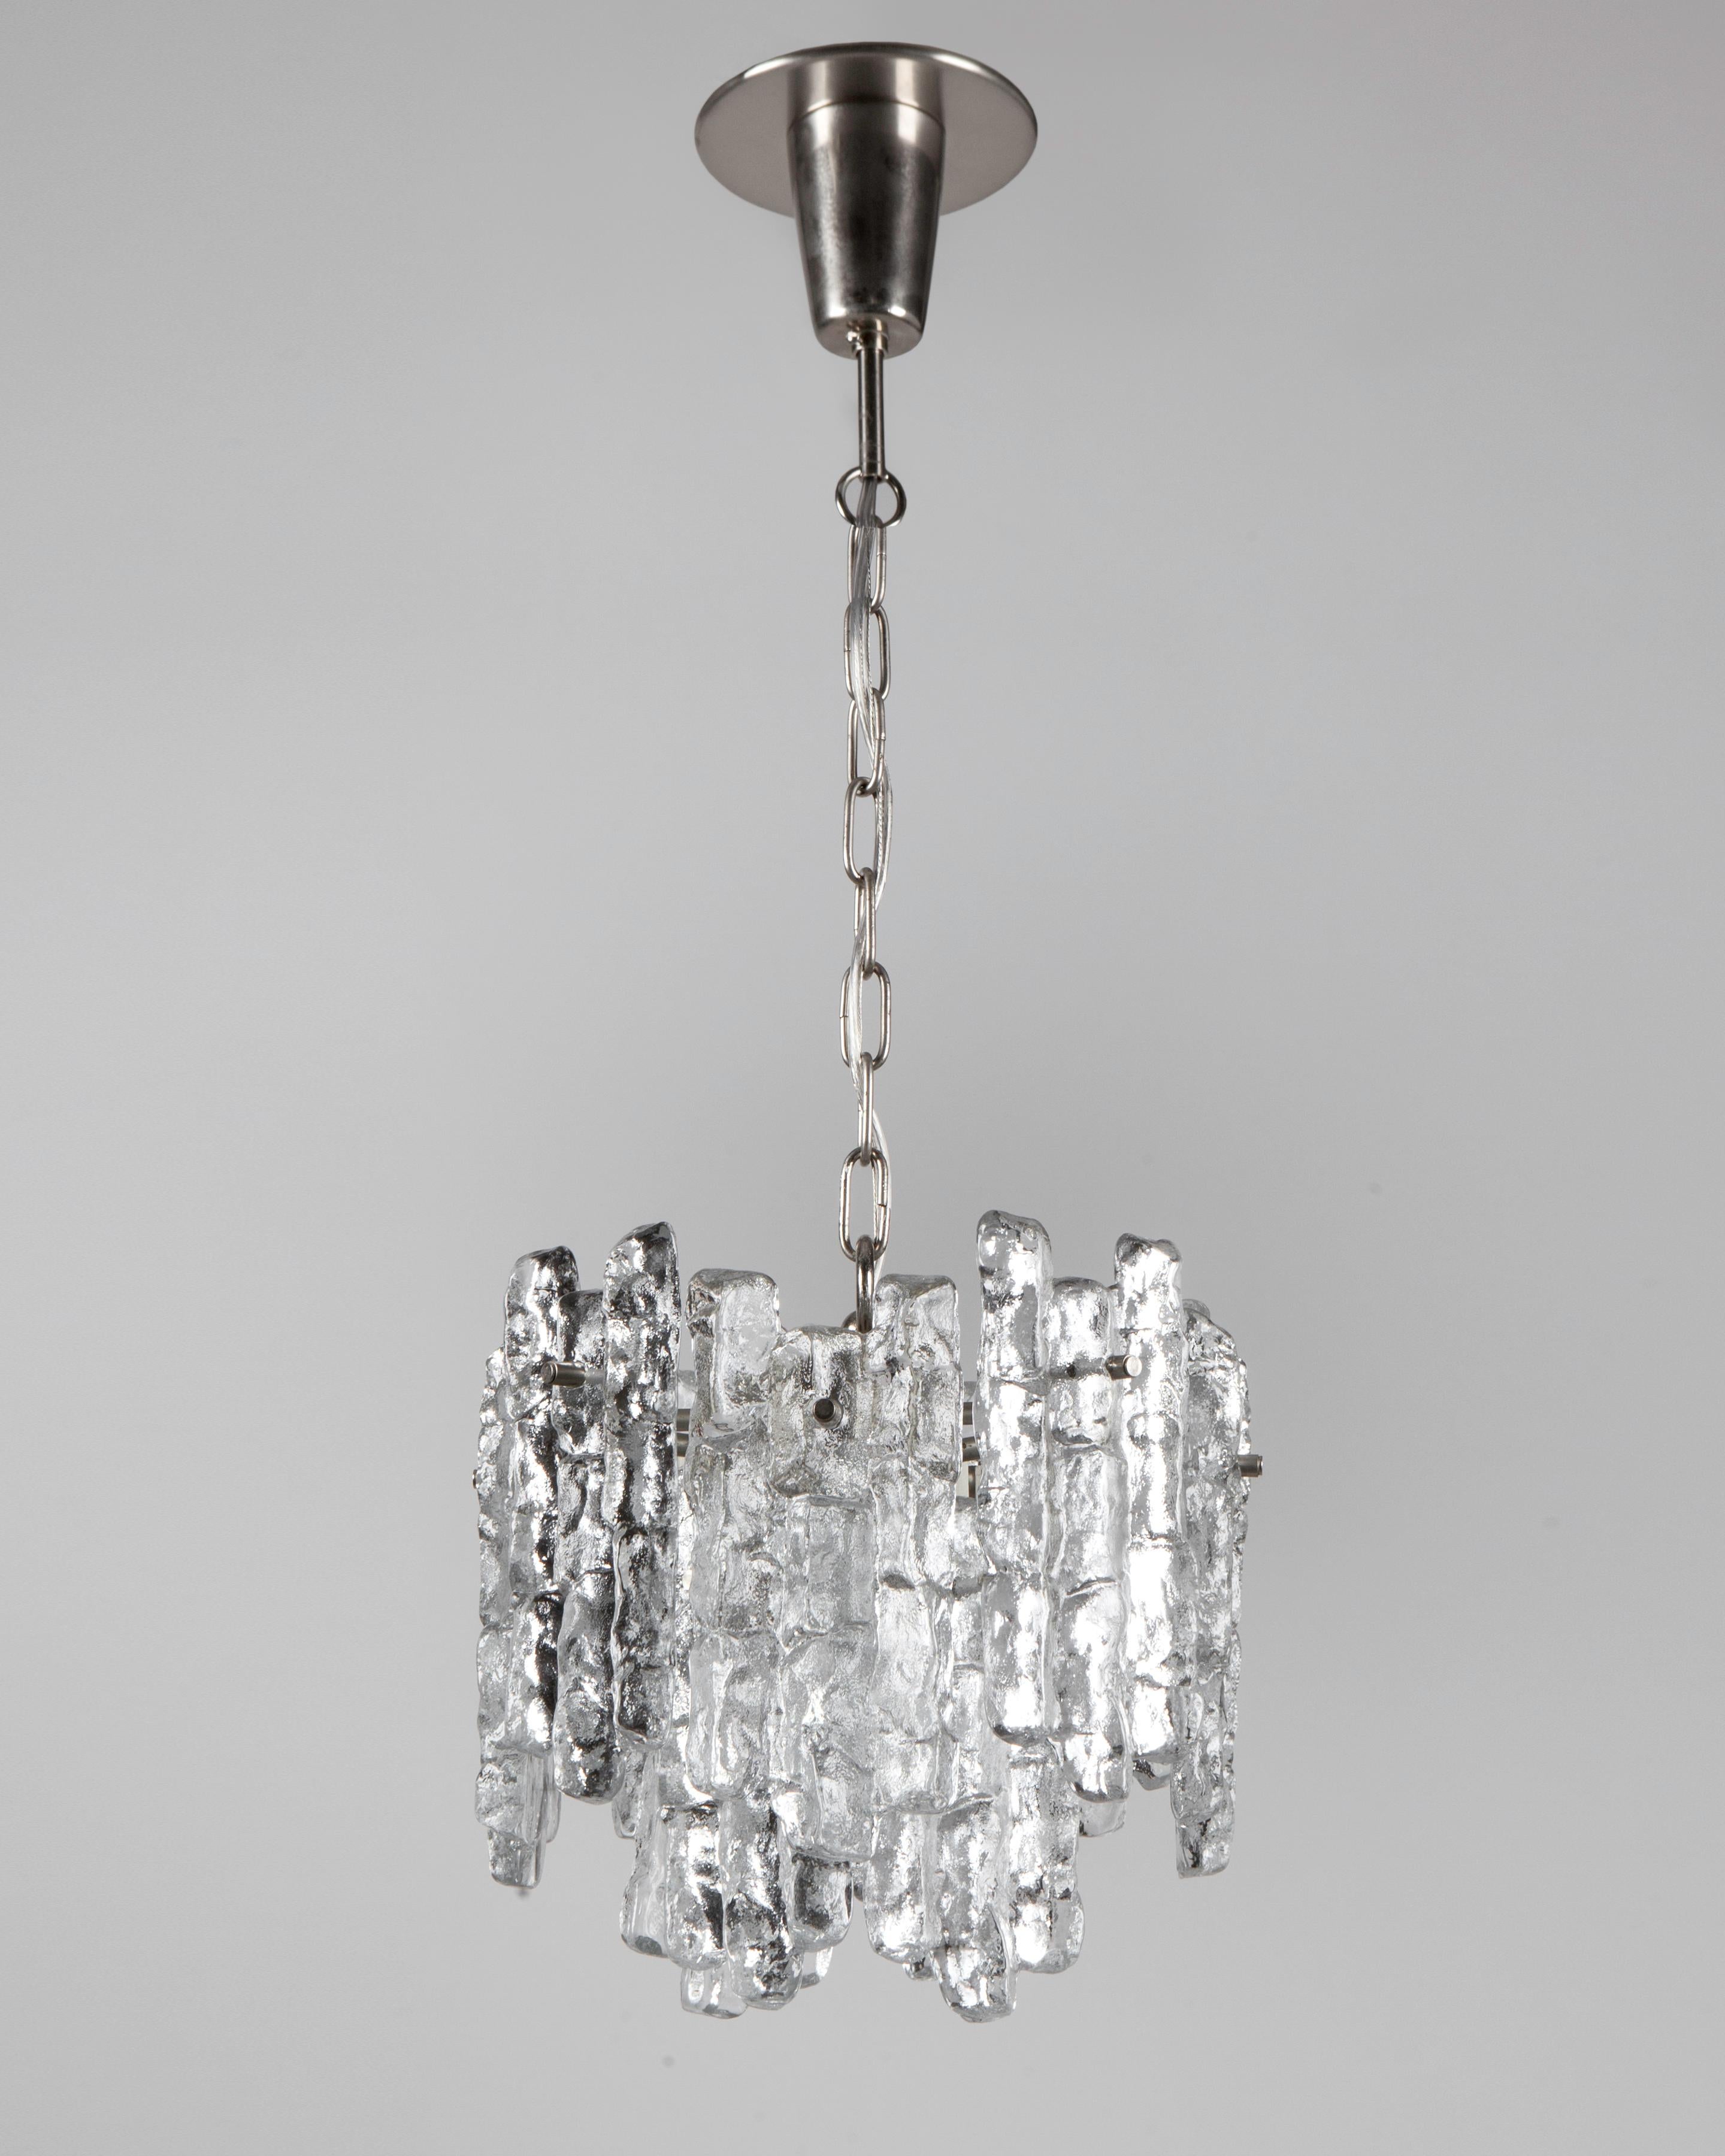 A vintage pendant with clear textured cast glass tiles on a nickel frame. Signed by the Austrian maker Kalmar. Due to the antique nature of this fixture, there may be some nicks or imperfections in the glass as well as variations from piece to